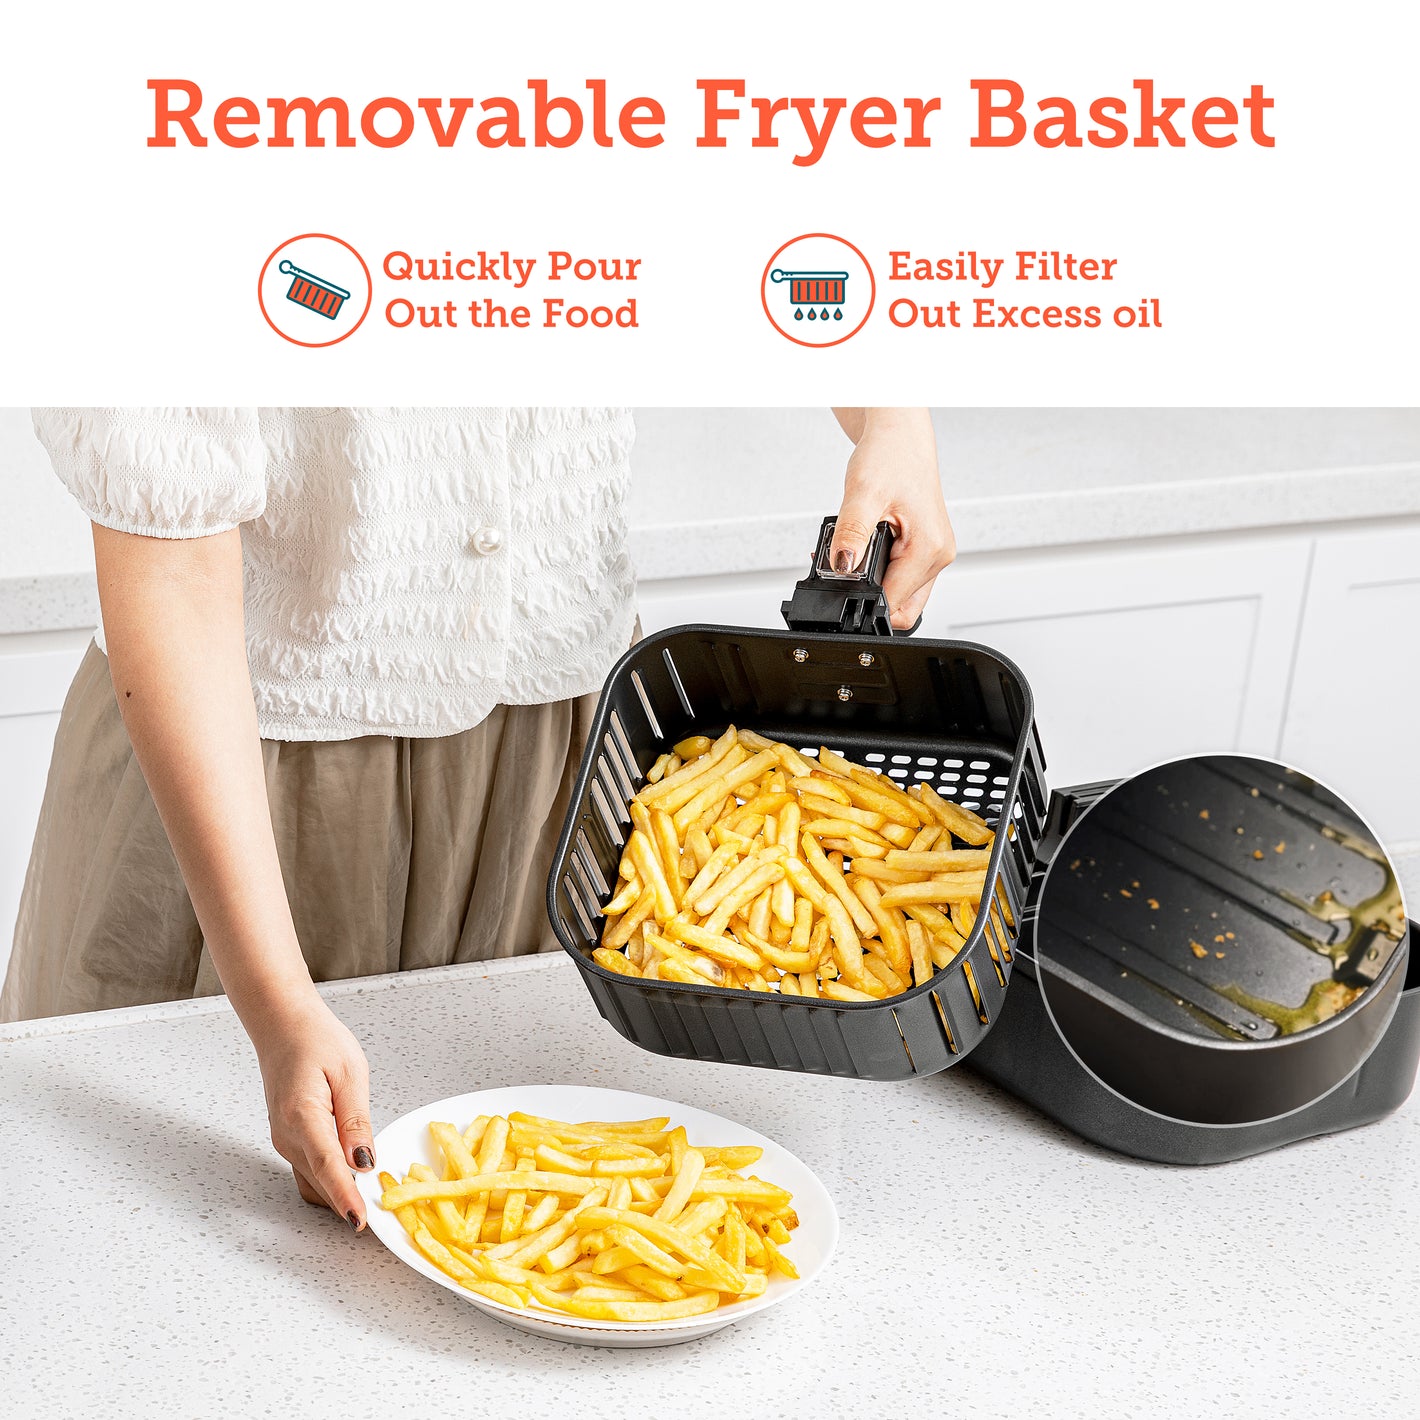 Removable Fryer Basket Quickly Pour Out the Food Easily Filter Out Excess oil